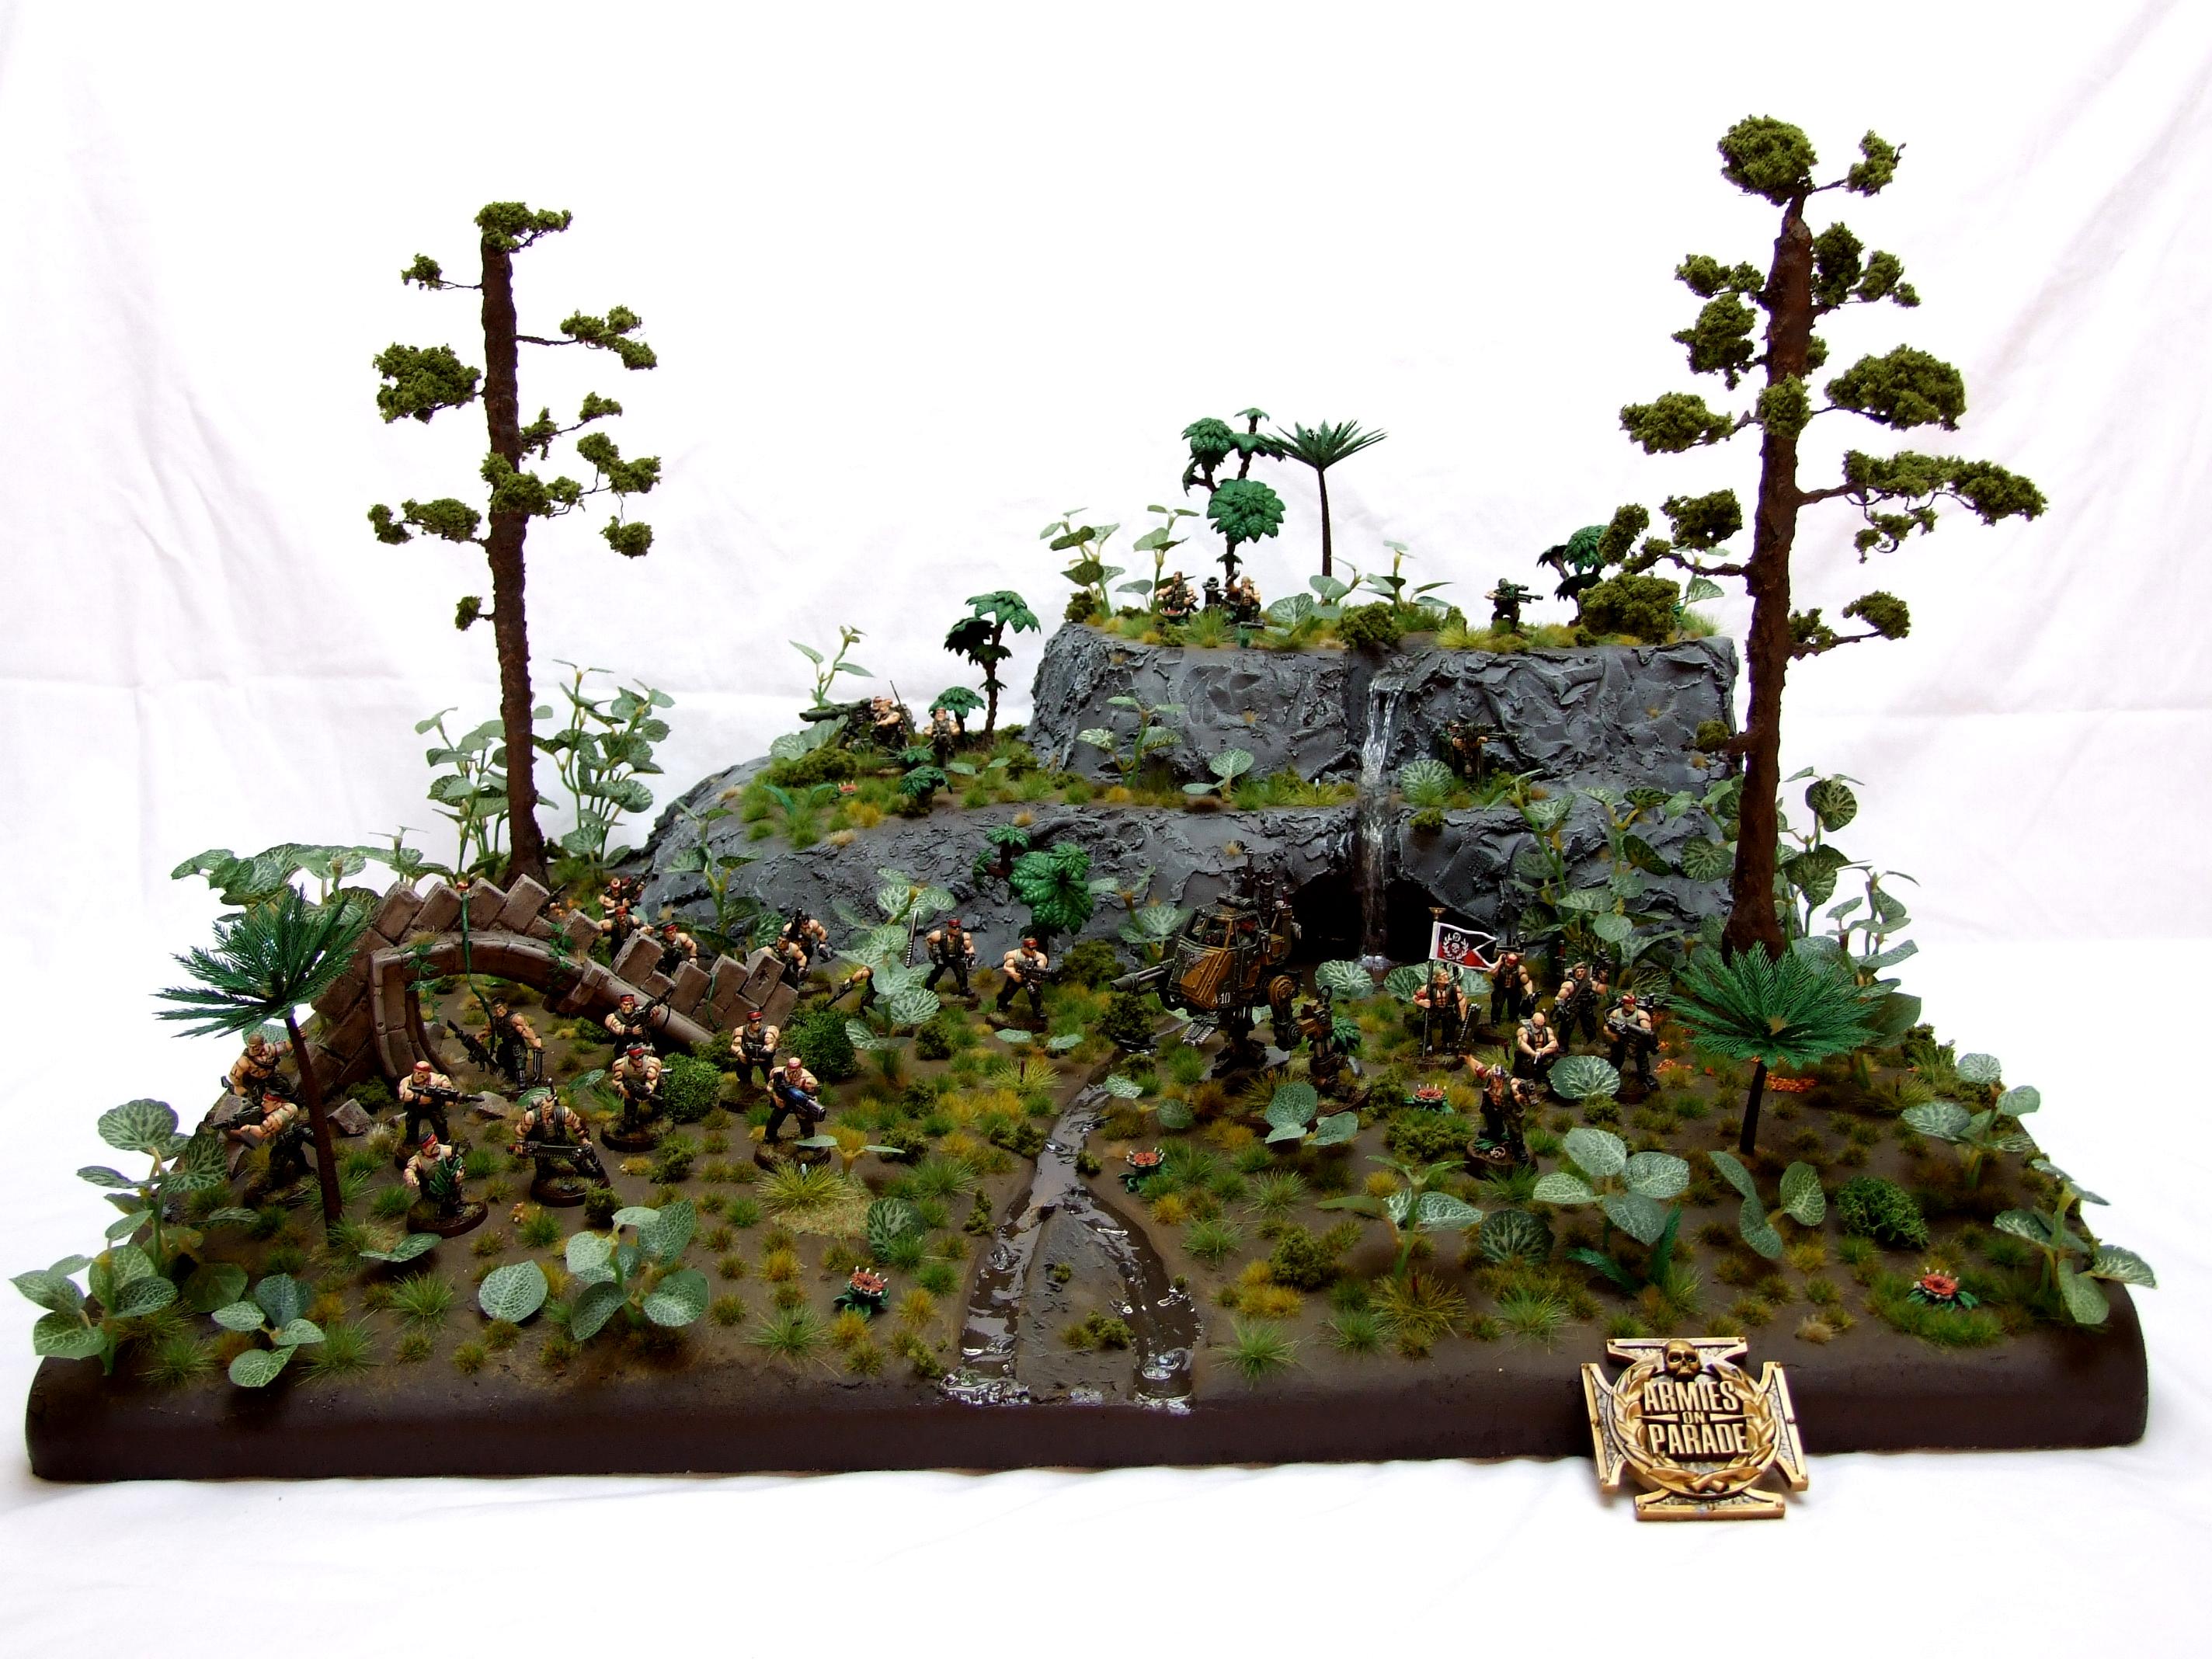 2013, Aop, Armies On Parade, Catachan, Imperial Guard, Jungle, Jungle Fighter, Jungle Scenery, Warhammer 40,000, Winner